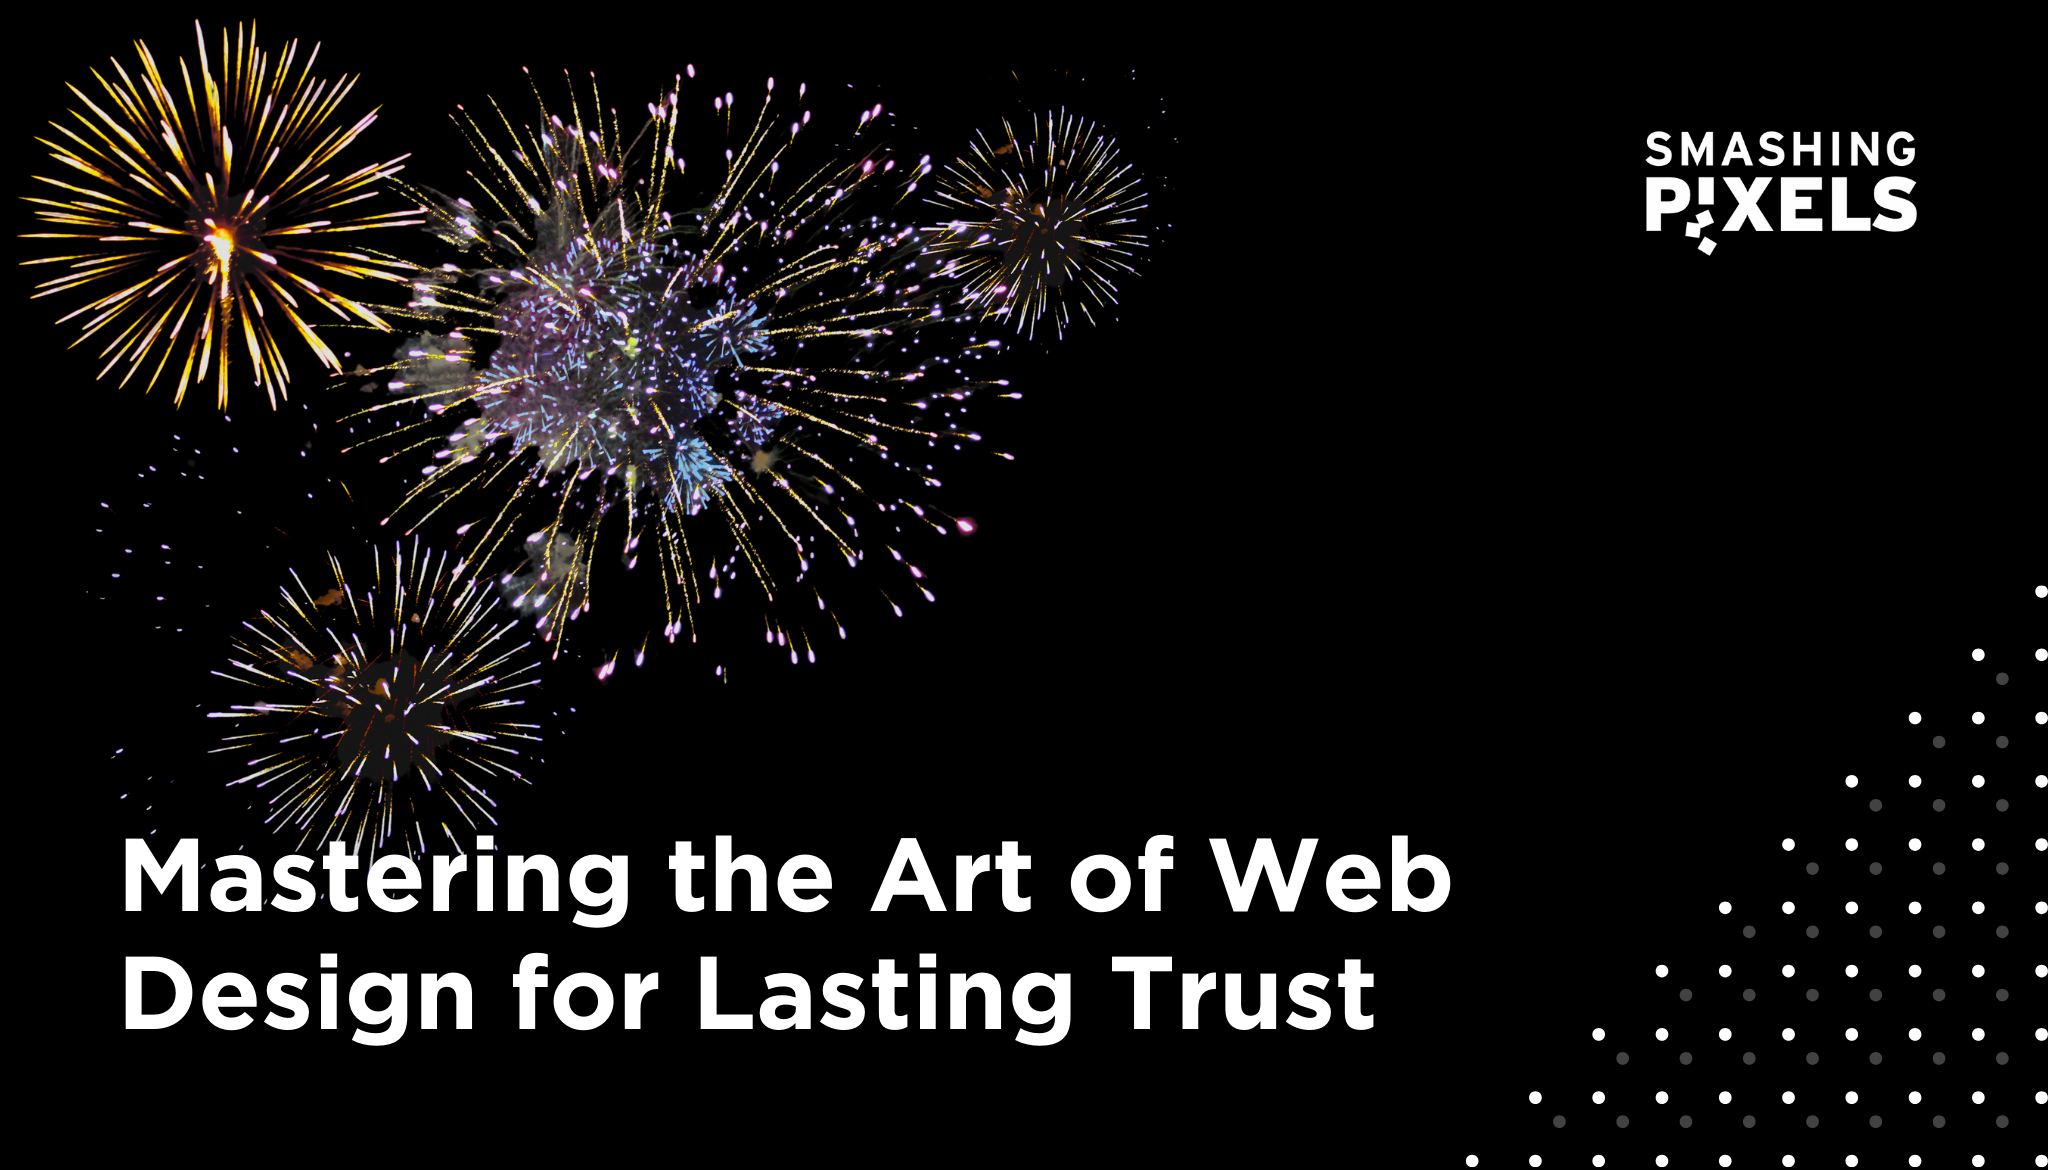 Excite, Engage, Convert: Mastering the Art of Web Design for Lasting Trust